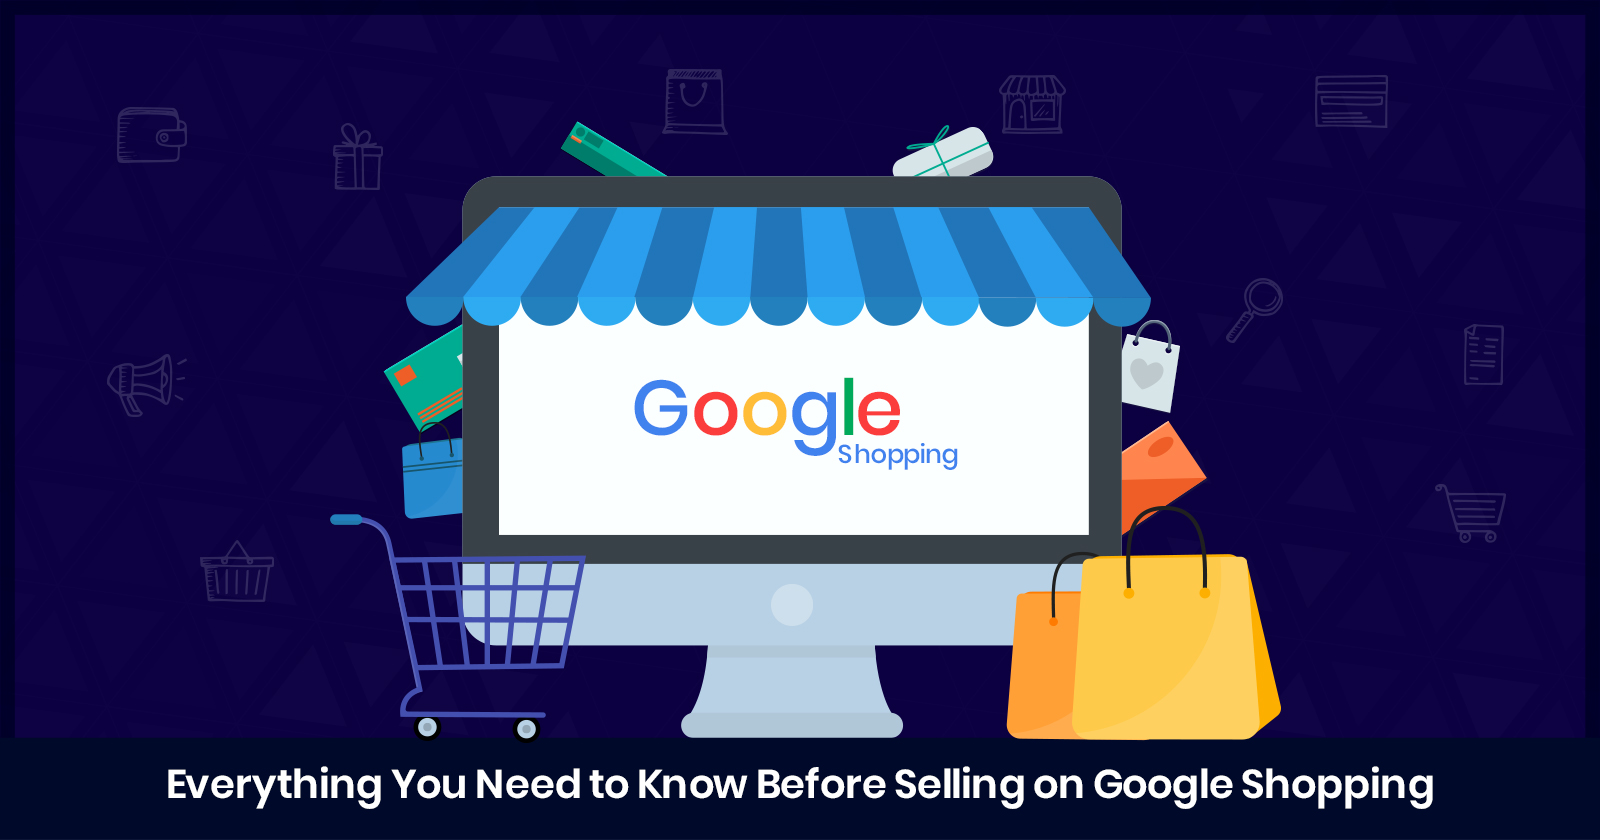 It’s Free To Sell On Google: Everything You Need To Know